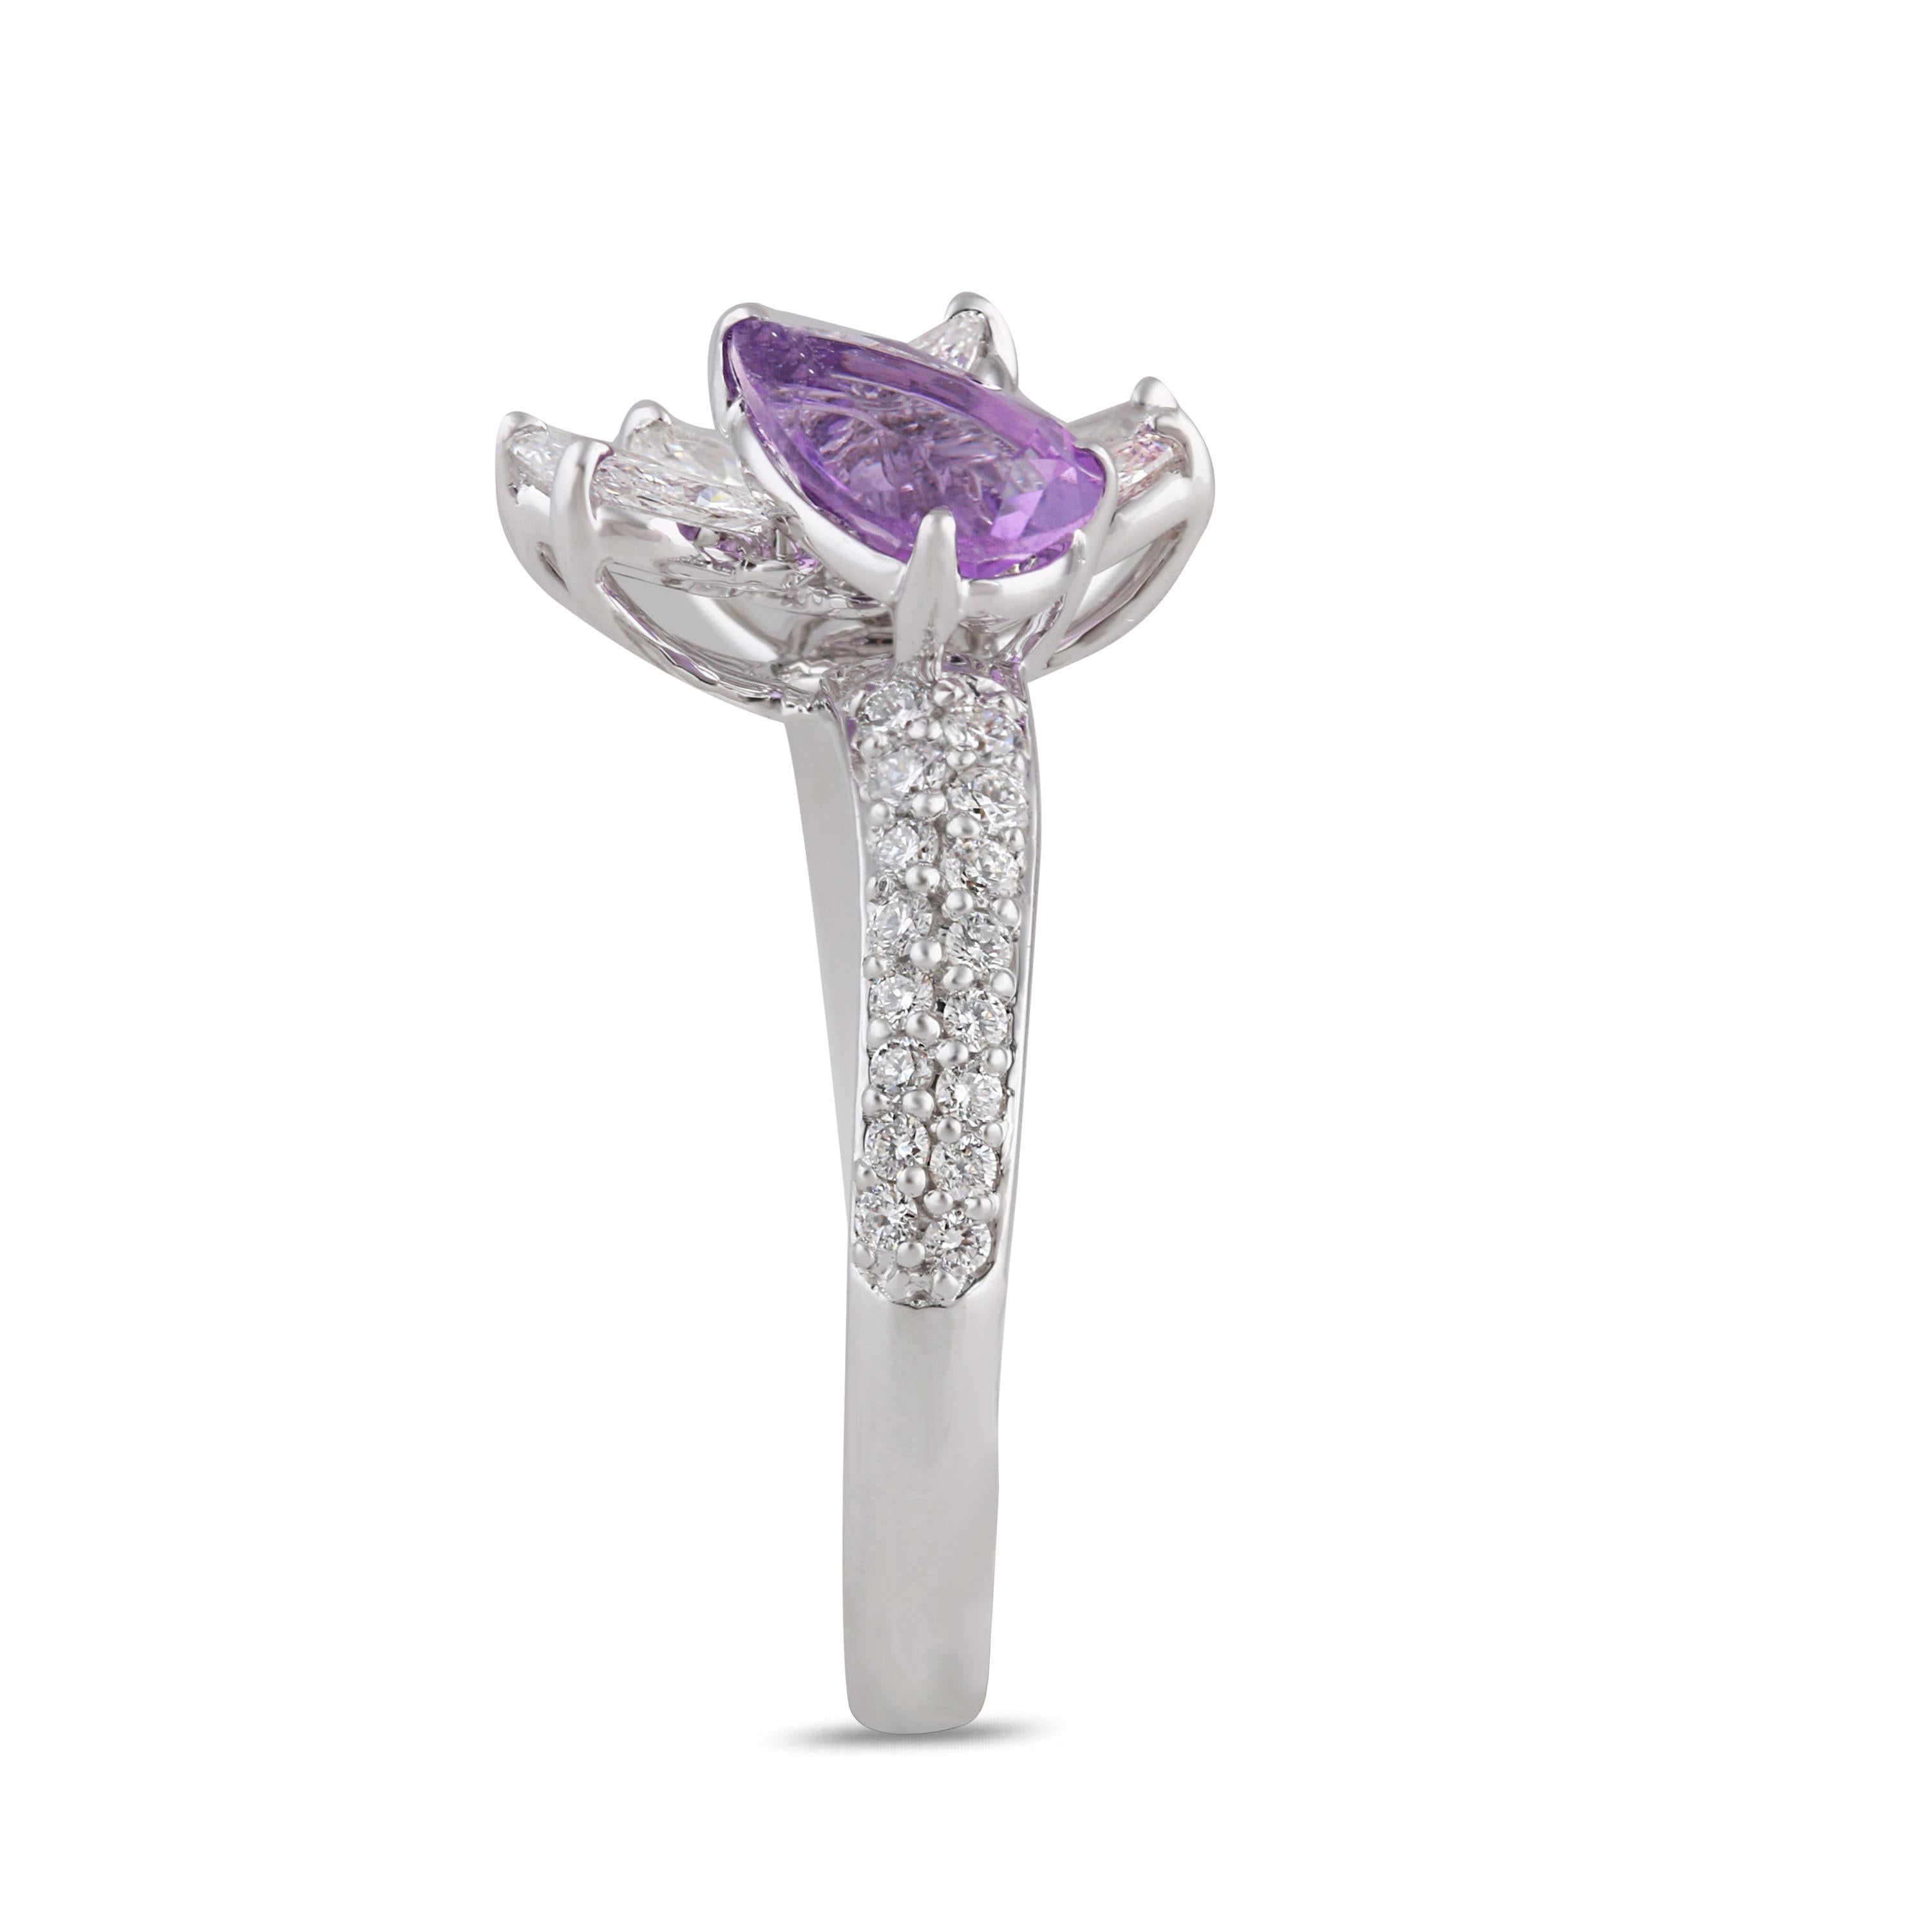 Studio Rêves 18 Karat White Gold Diamond Ring with Amethyst In New Condition For Sale In Mumbai, Maharashtra